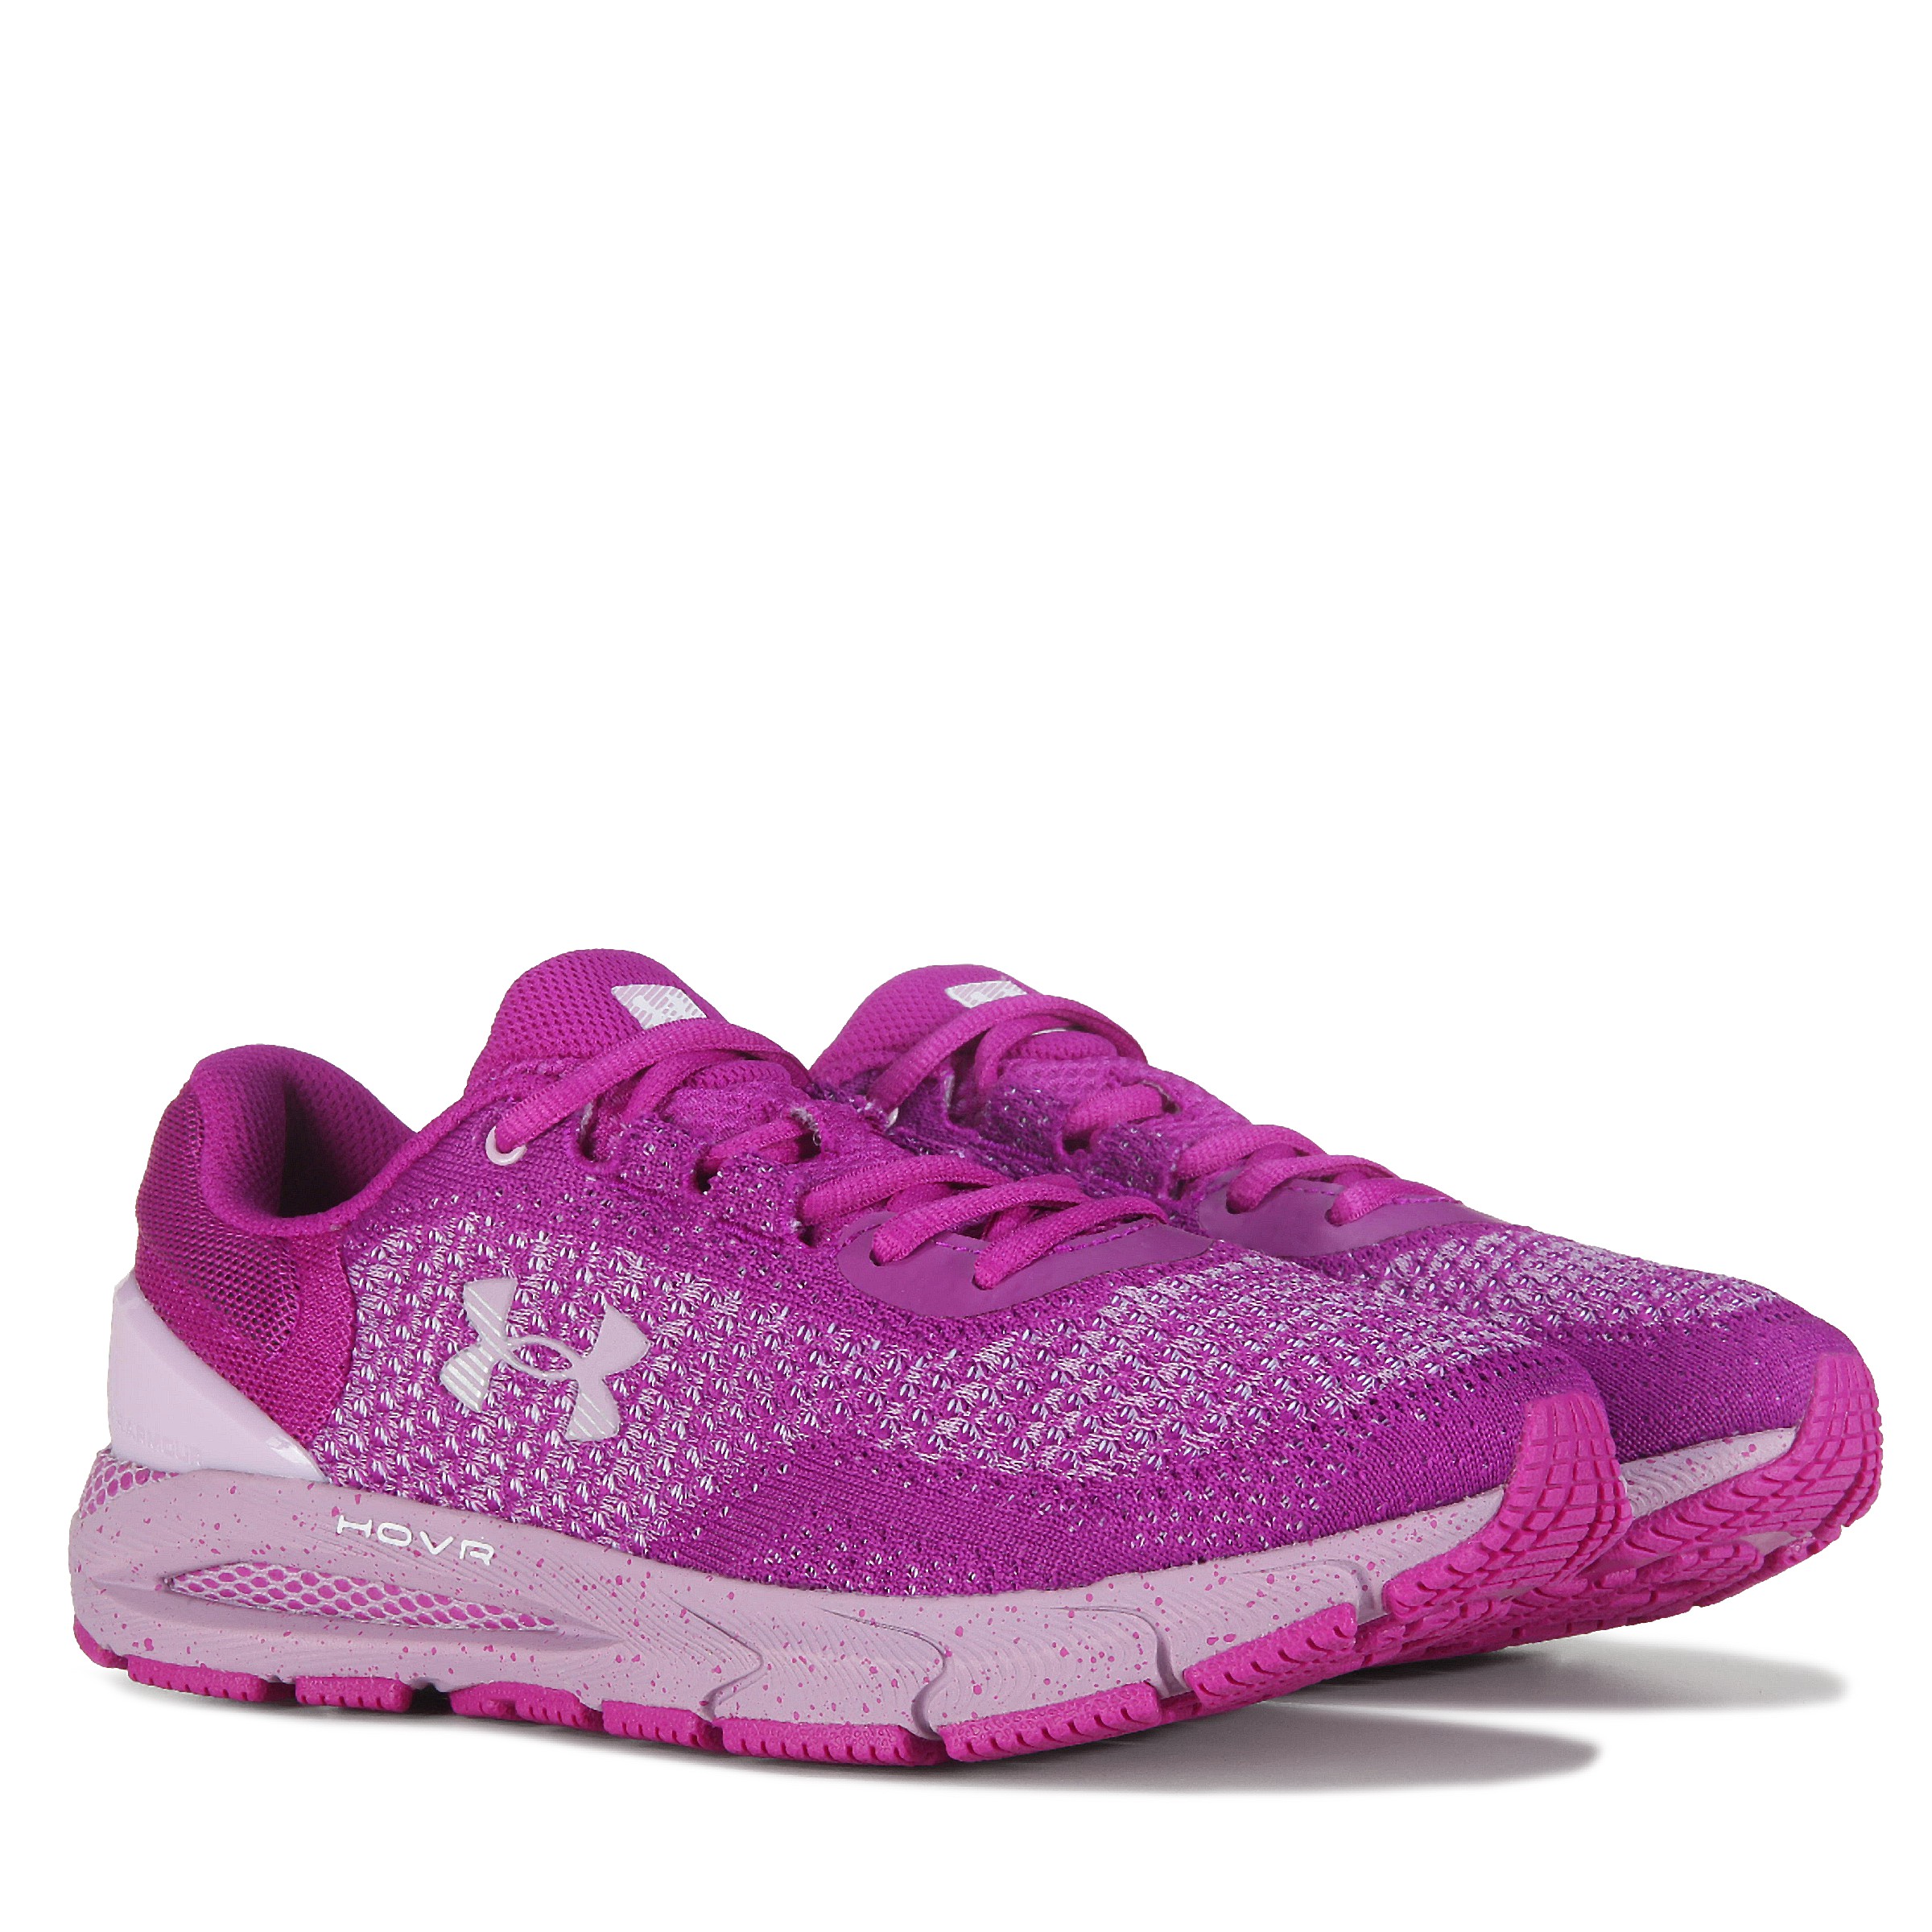 Under Armour Women's Charged Intake 5 Running Shoe